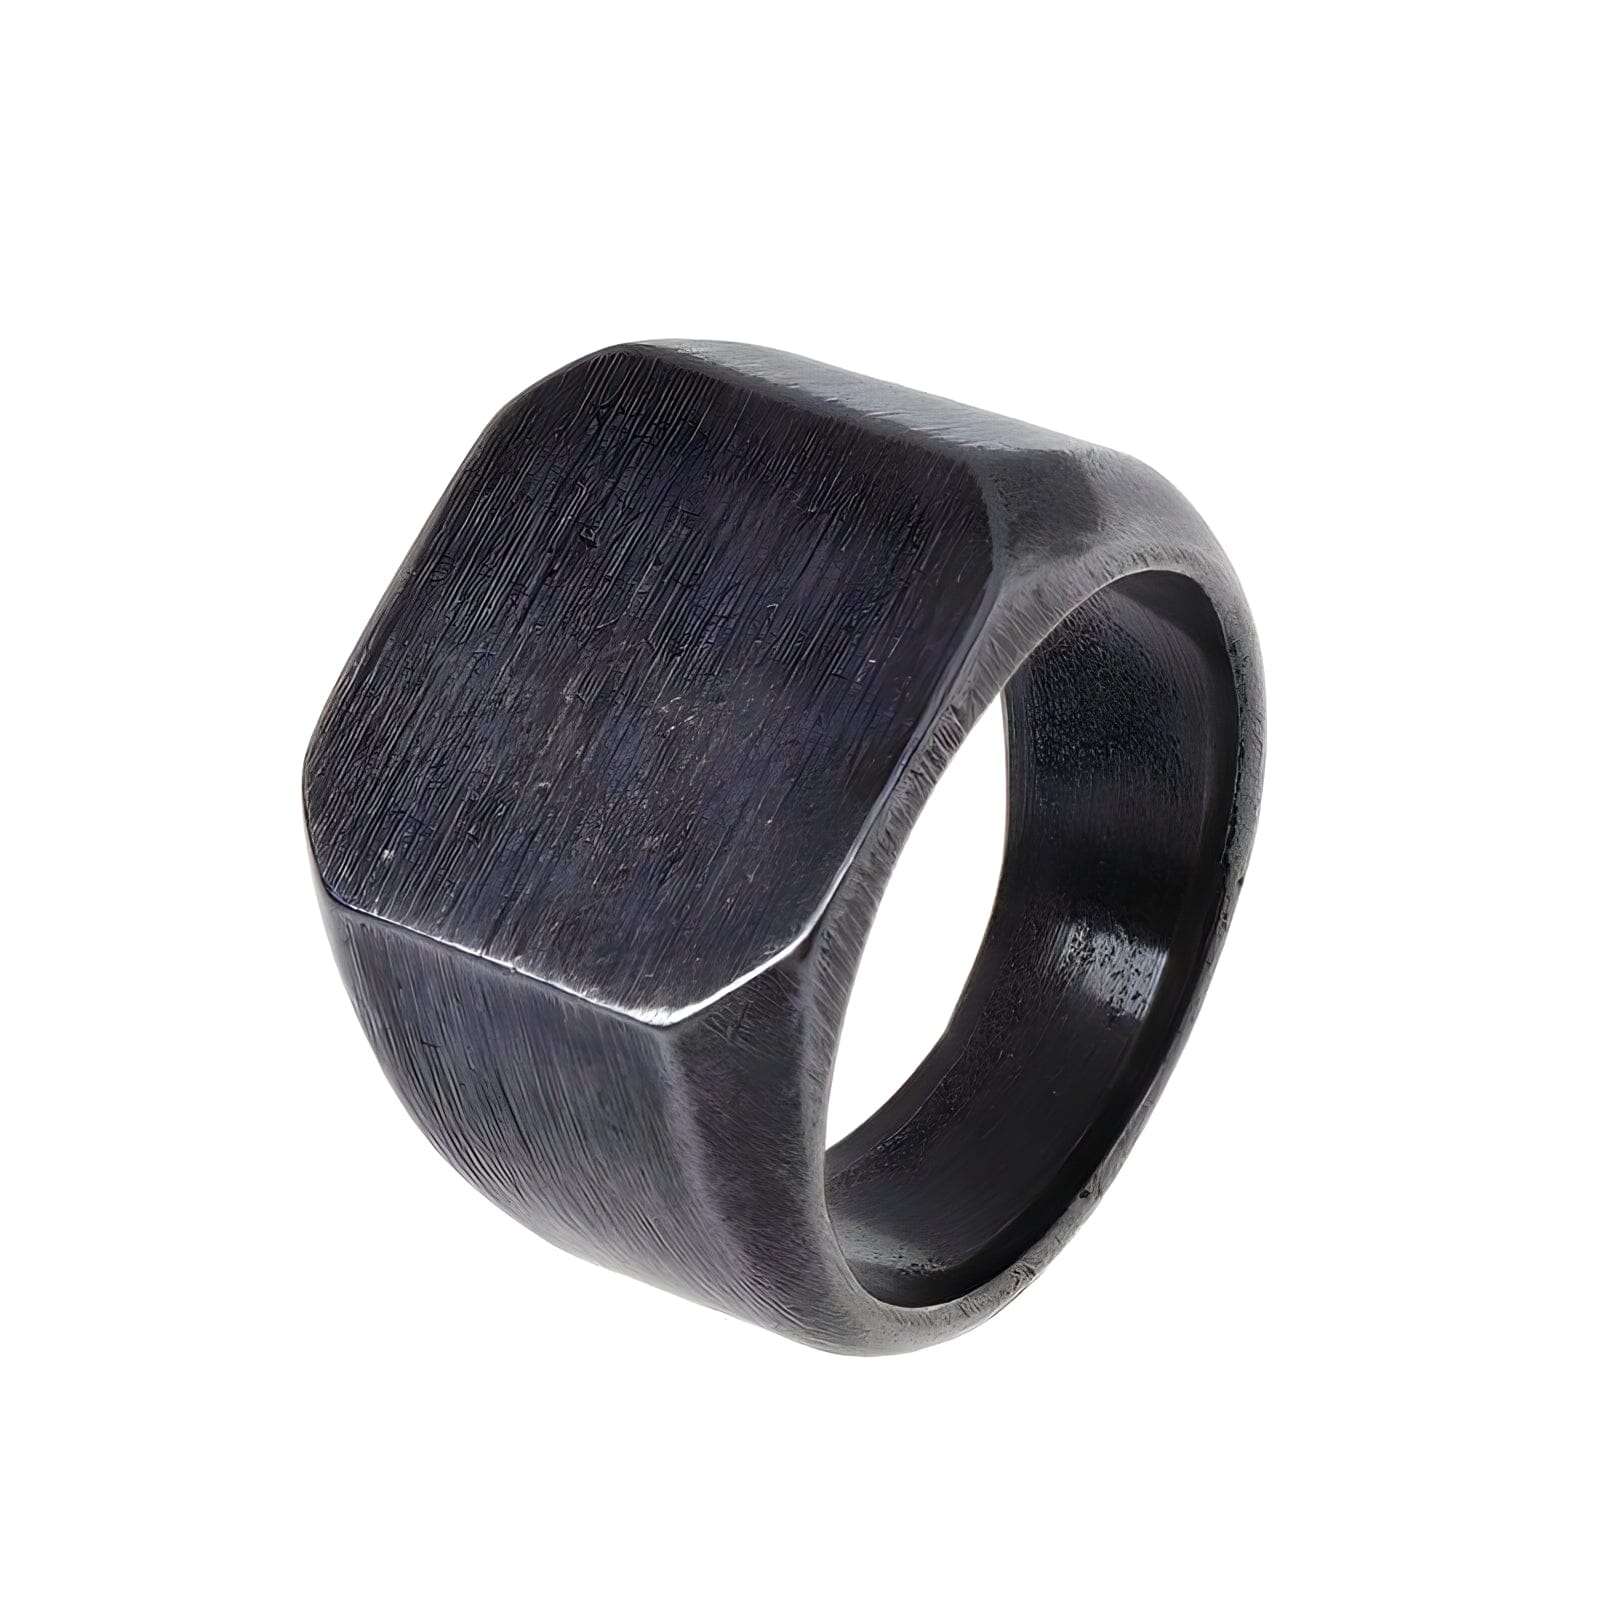 The Slate Ring